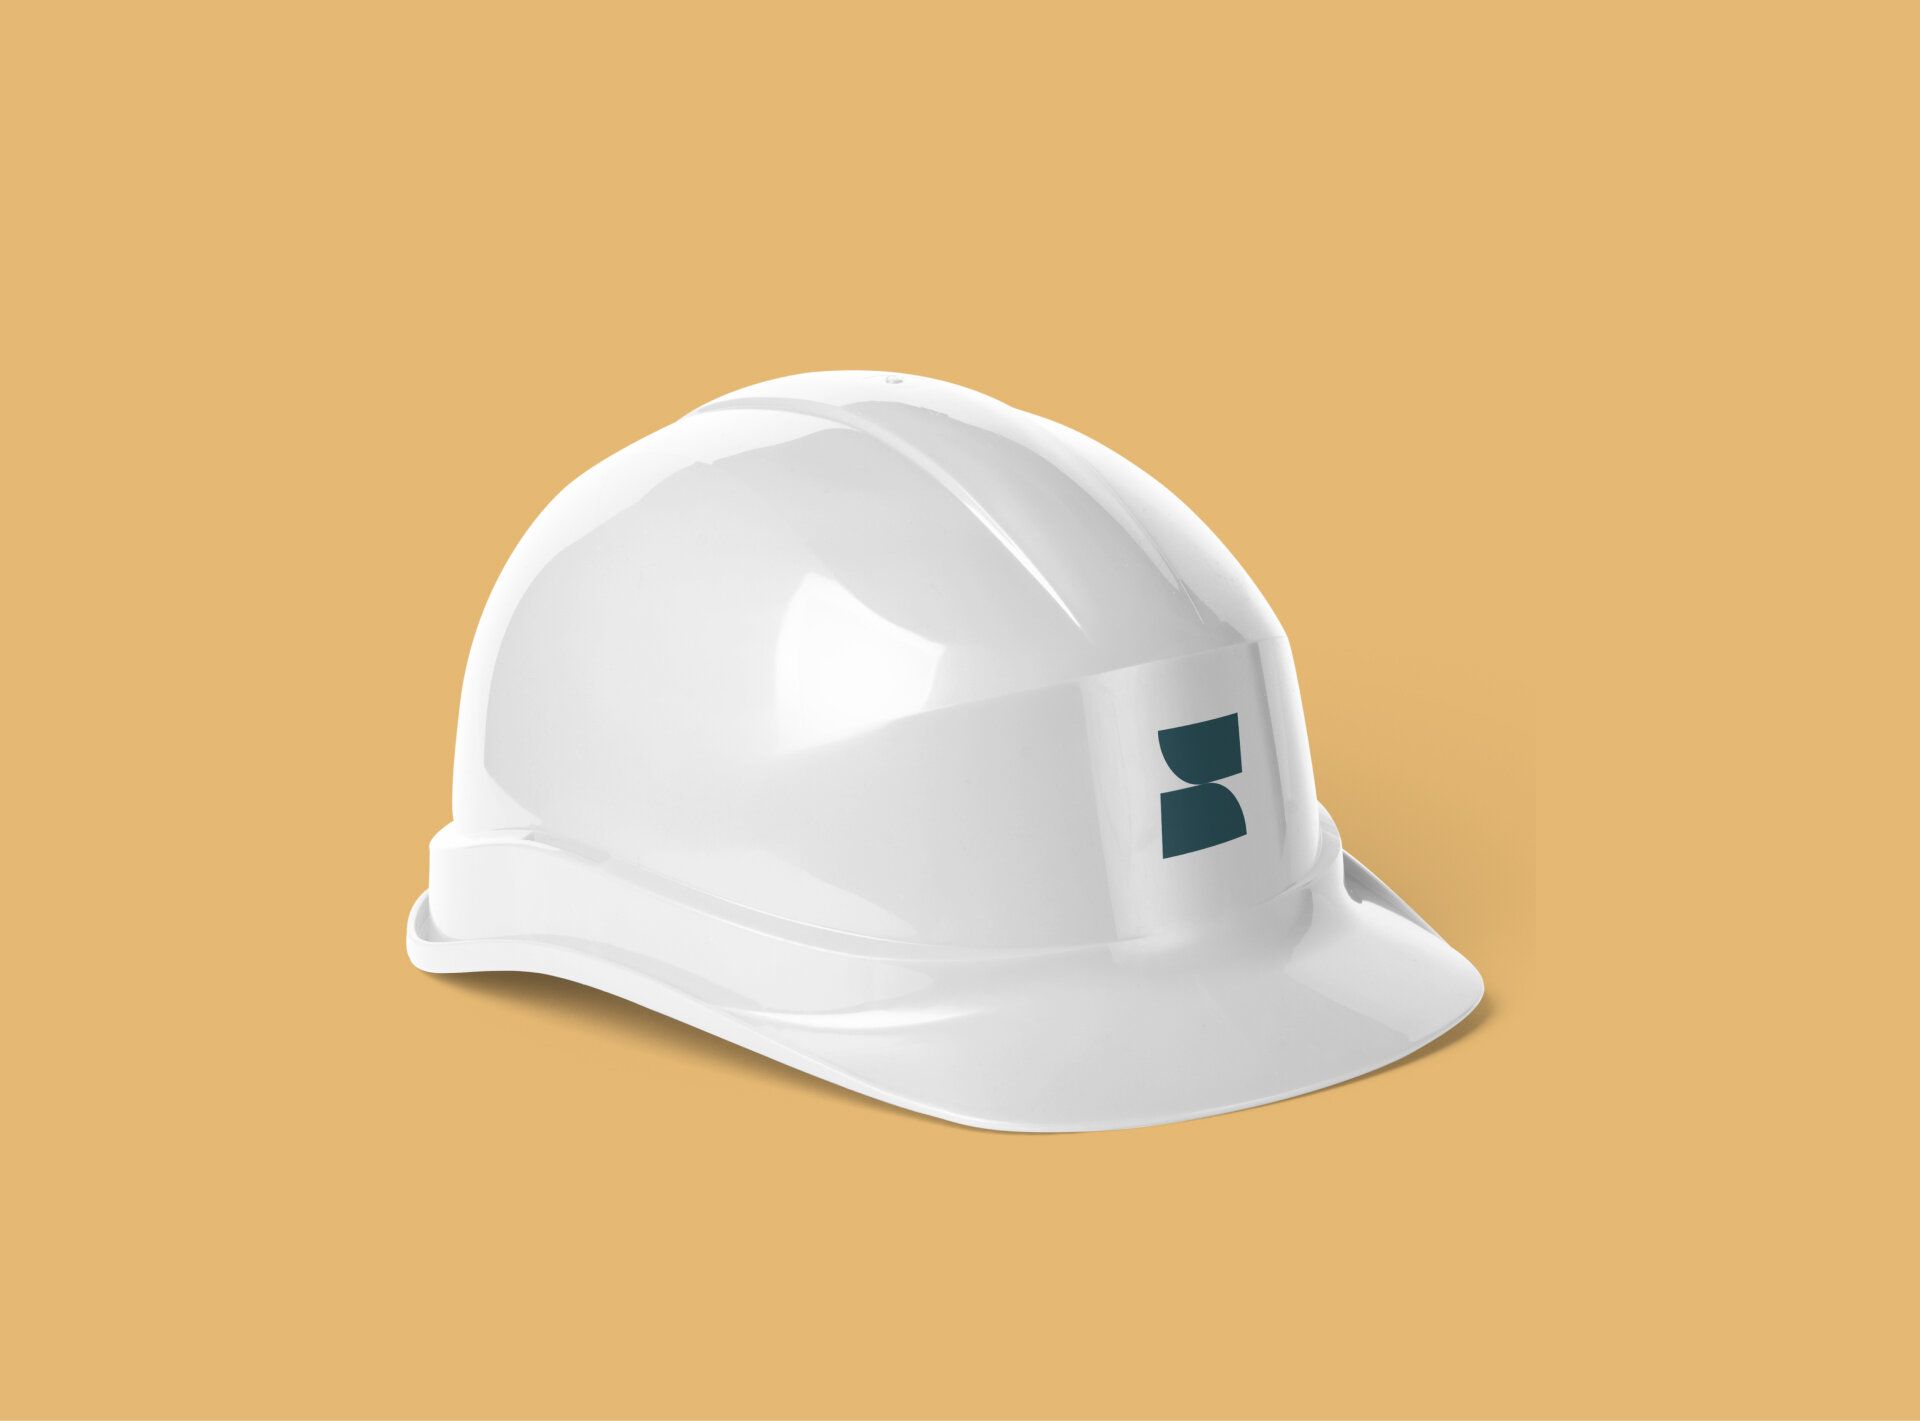 An illustration of a safety helmet with Sjöblom's logo on the front